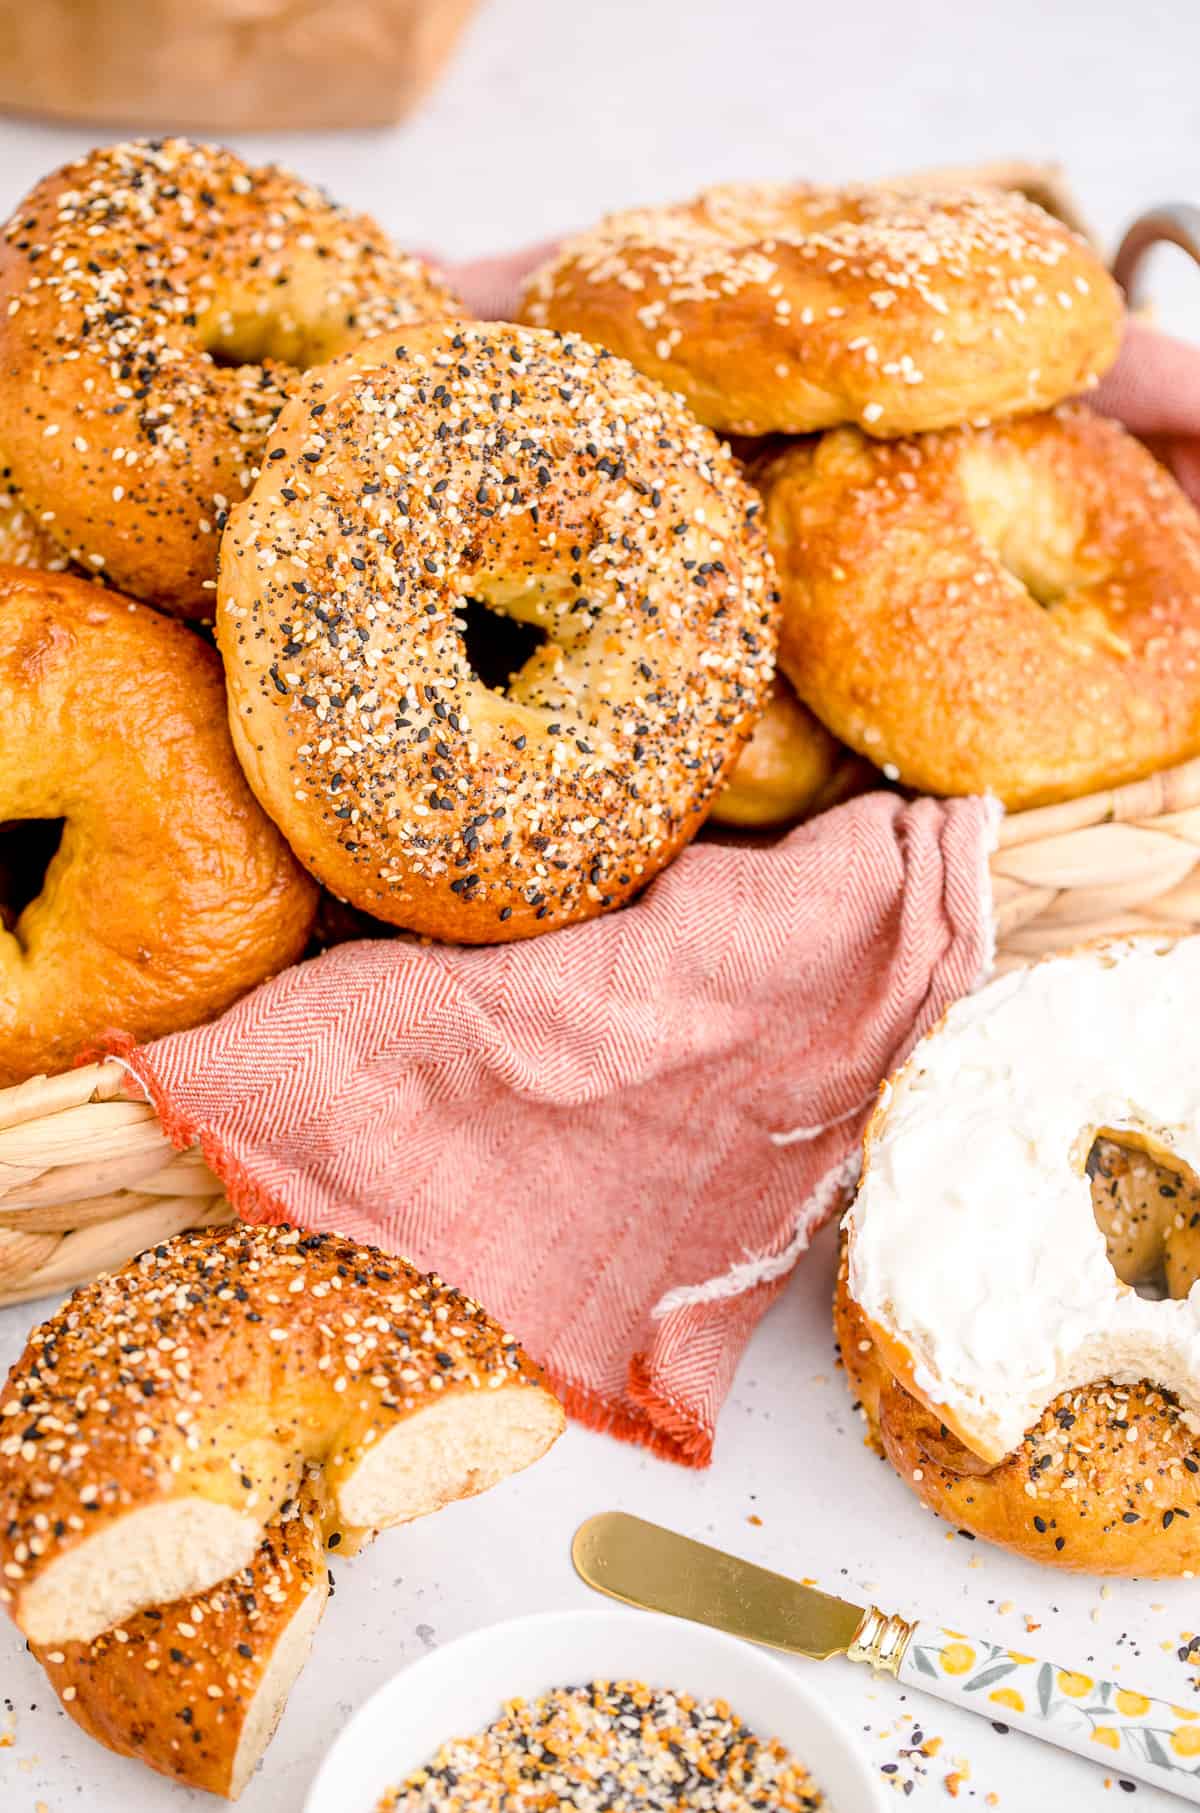 Homemade Bagels in basket with pink linen, one with cream cheese and one cut in half.